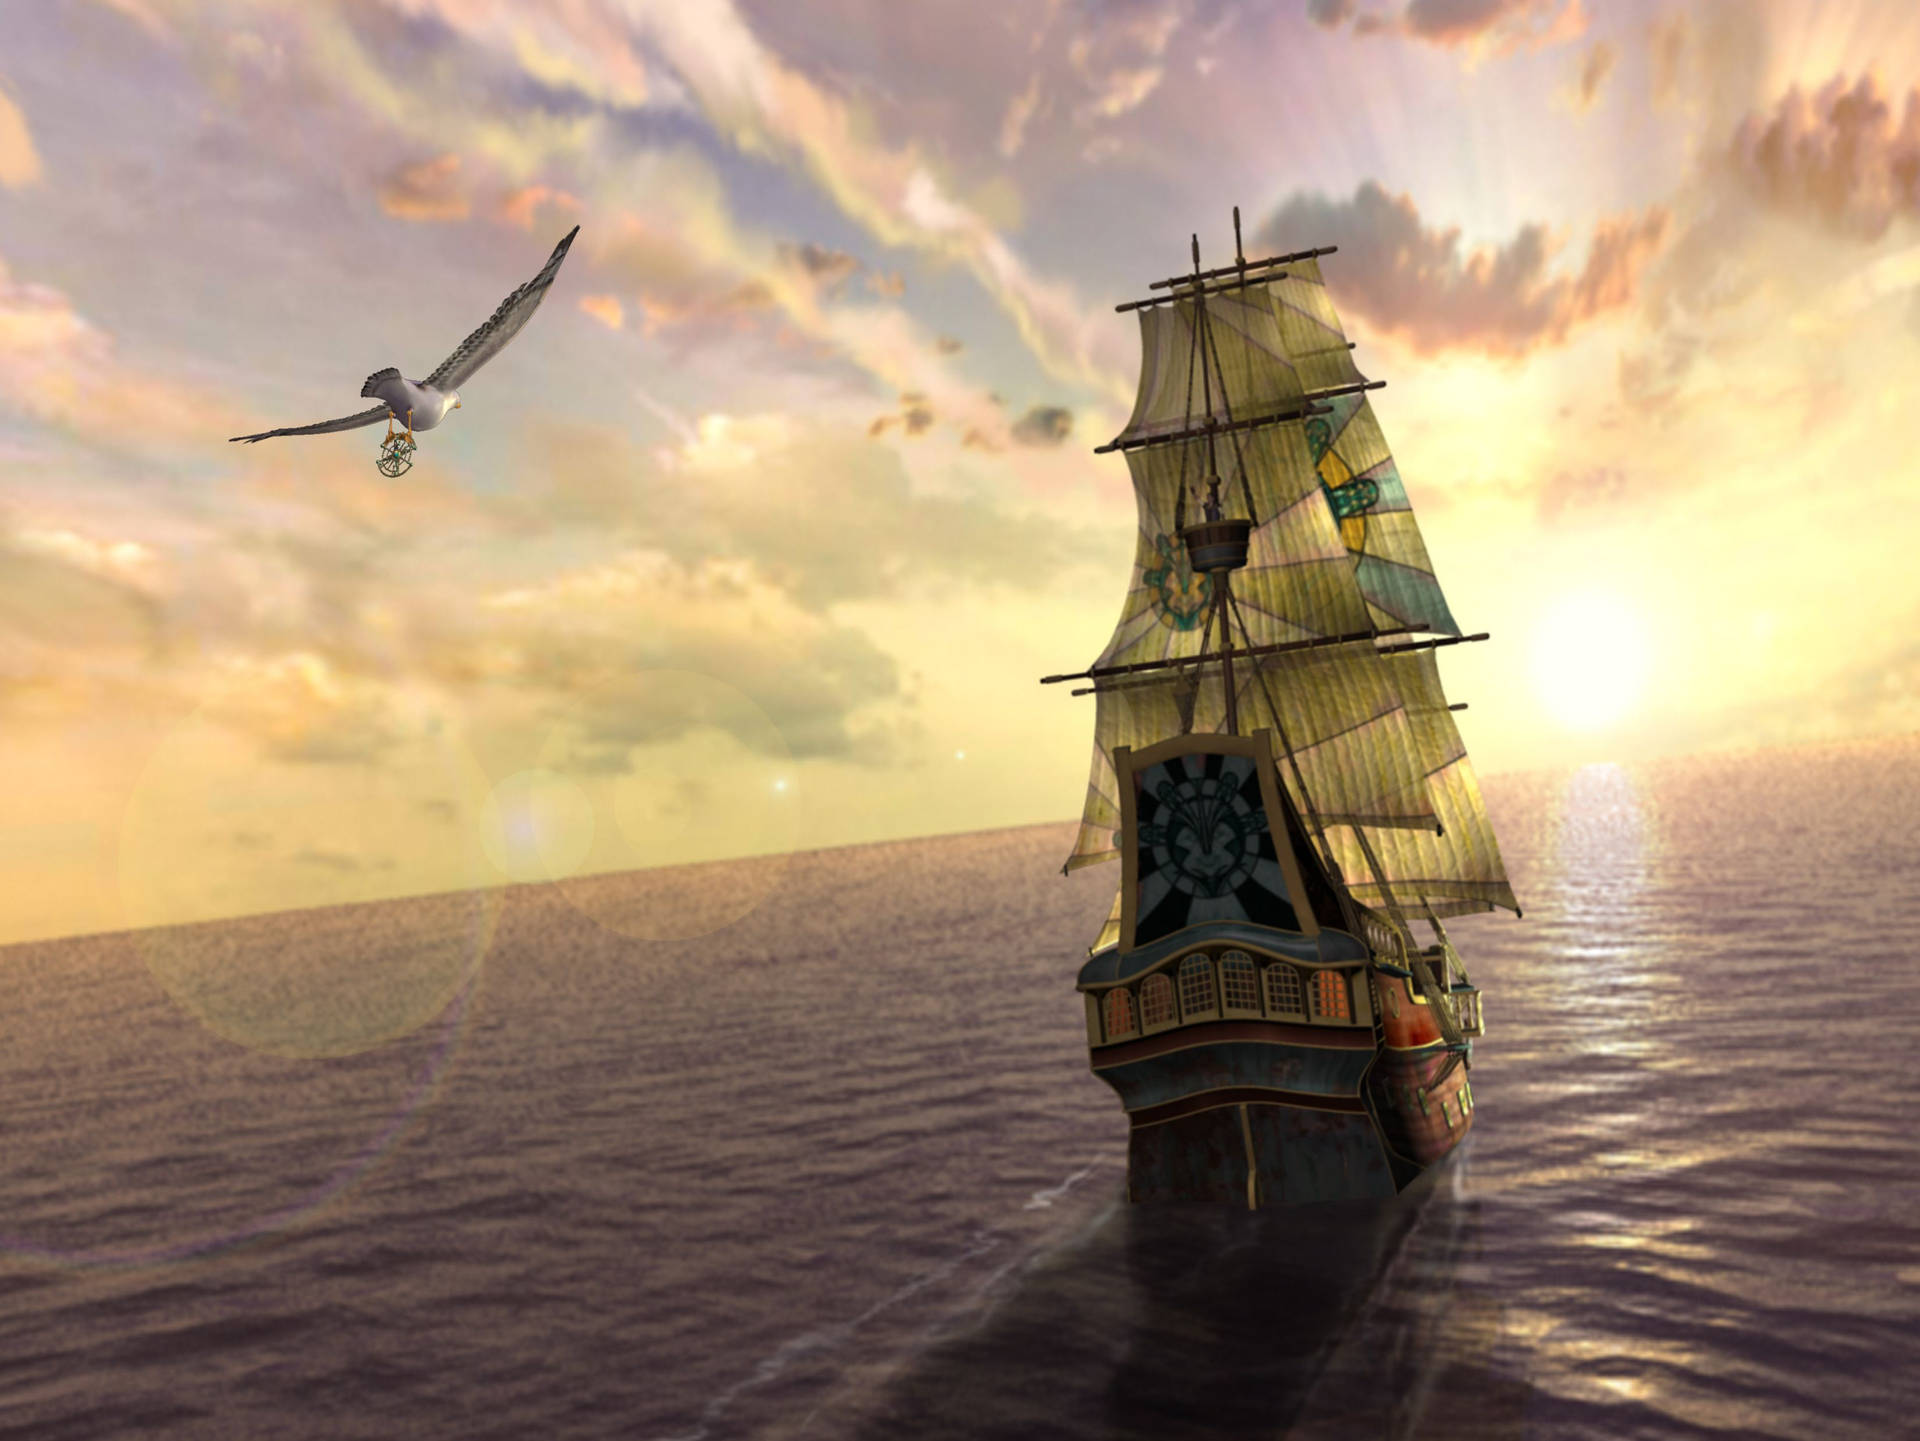 Sailing Ship With Flying Bird